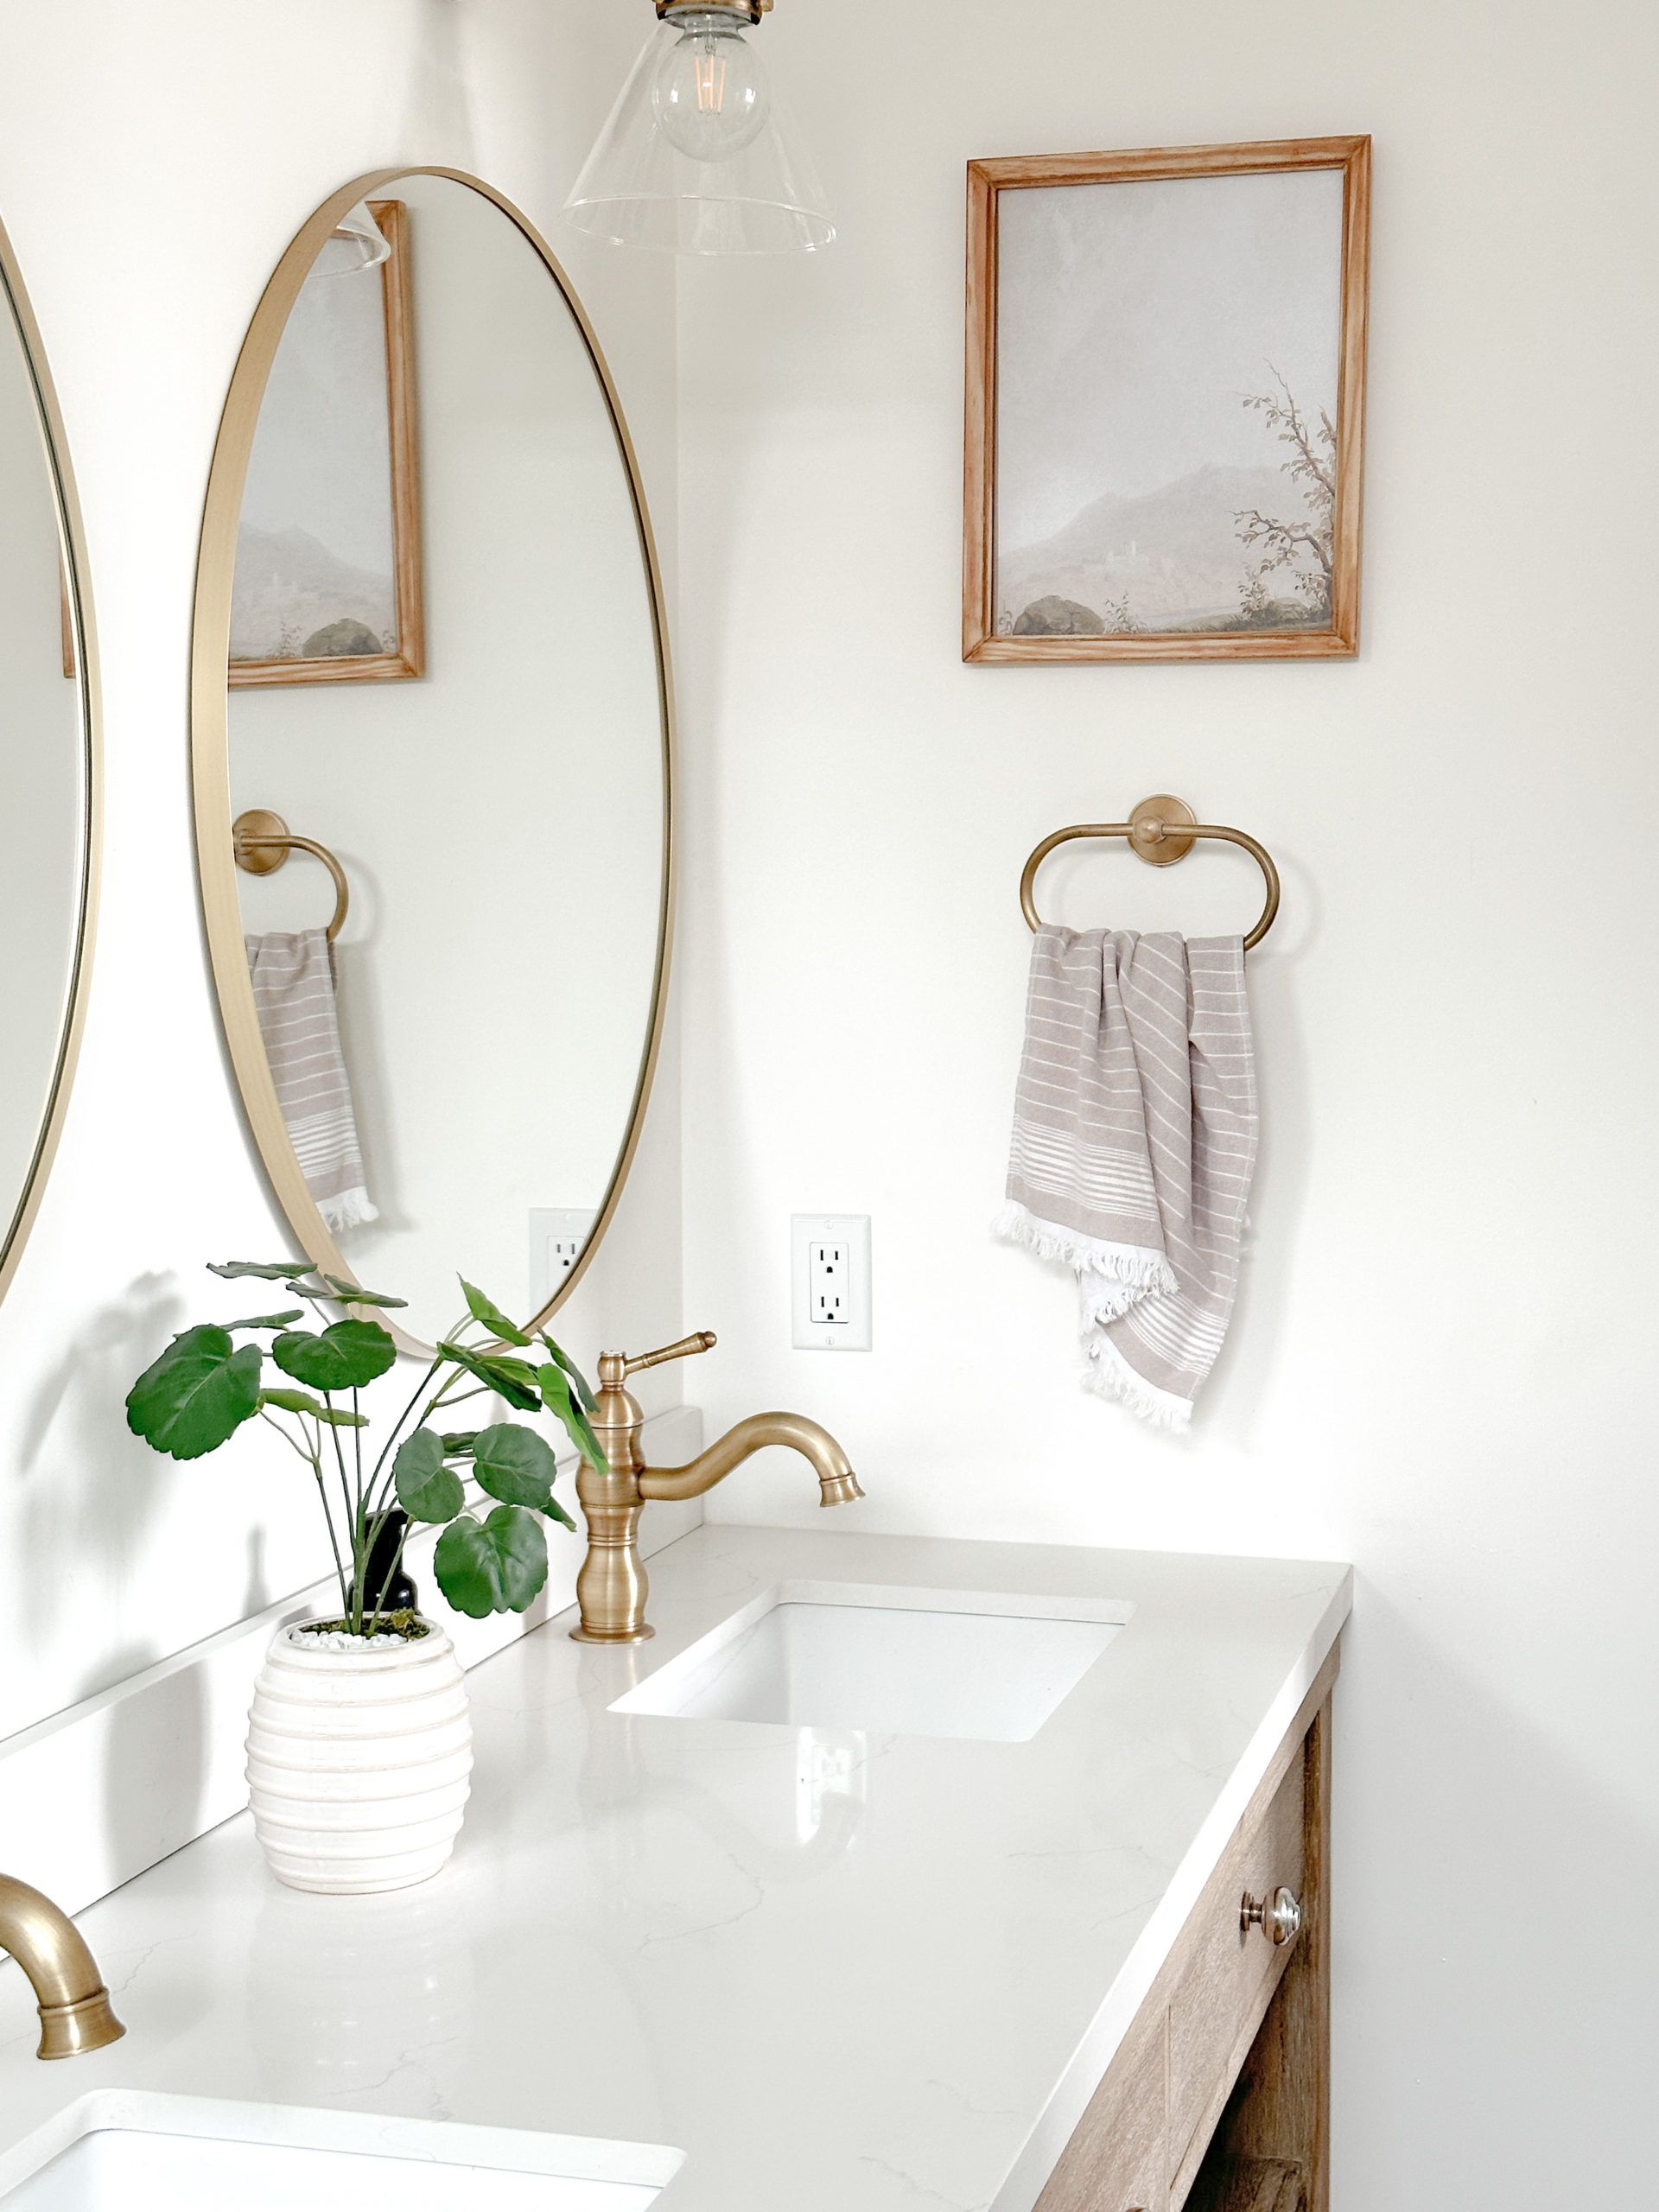 Our master bathroom round up